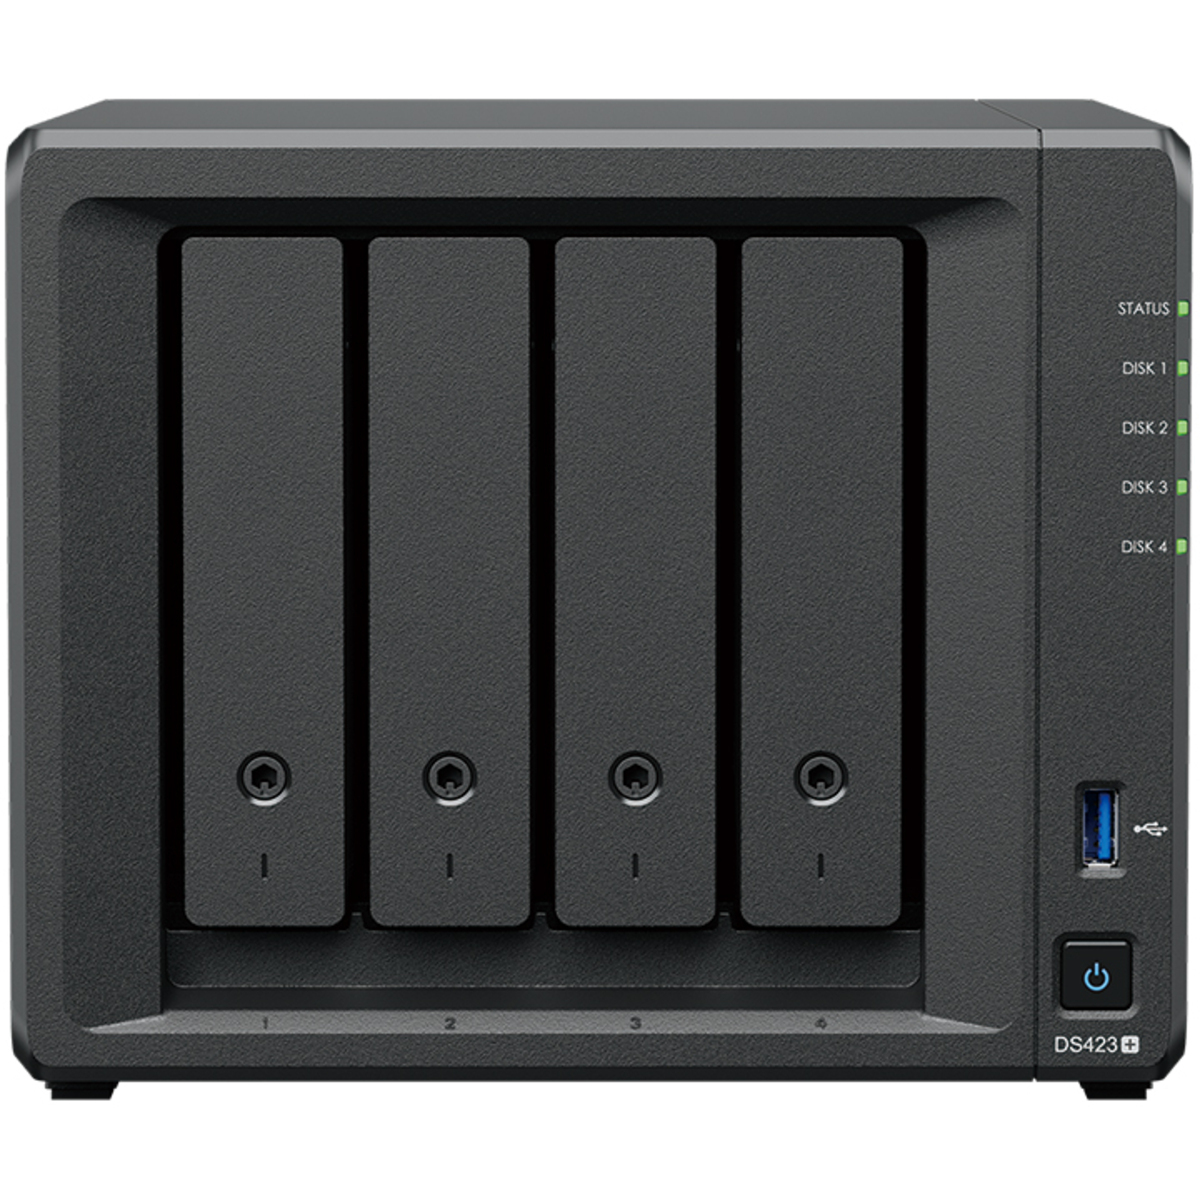 Synology DiskStation DS423+ 28tb 4-Bay Desktop Multimedia / Power User / Business NAS - Network Attached Storage Device 2x14tb Western Digital Ultrastar DC HC530 WUH721414ALE6L4 3.5 7200rpm SATA 6Gb/s HDD ENTERPRISE Class Drives Installed - Burn-In Tested - FREE RAM UPGRADE DiskStation DS423+